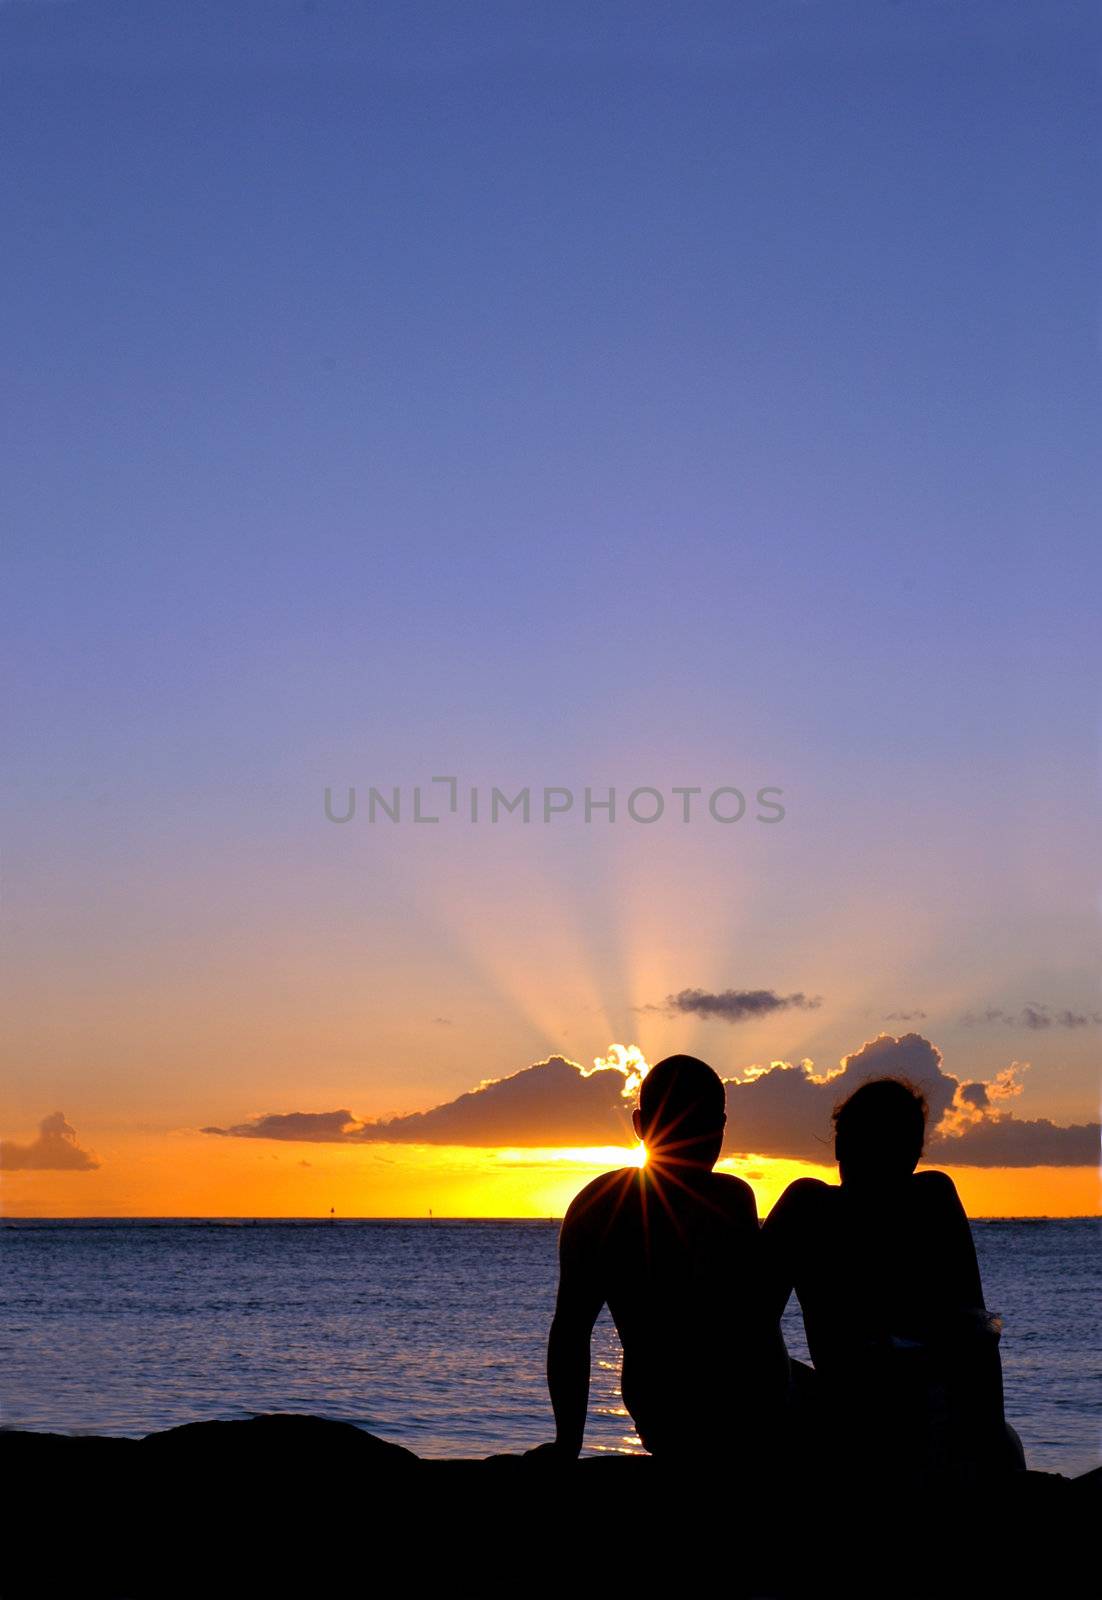 Romantic Vacation Image of a Loving Couple at Sunset With Copy Space